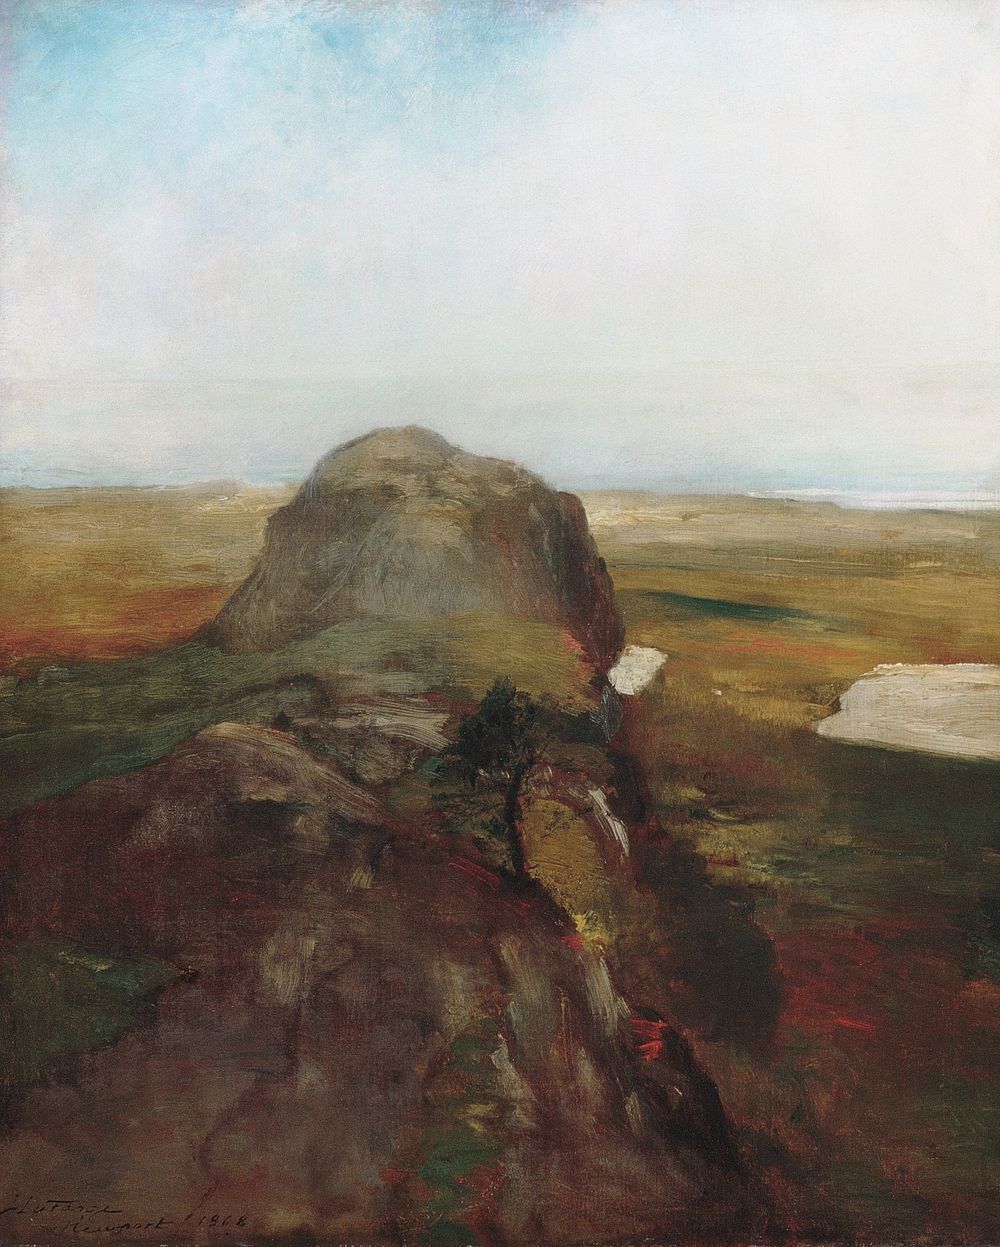 Autumn Study, View over Hanging Rock, Newport, R.I. by John La Farge